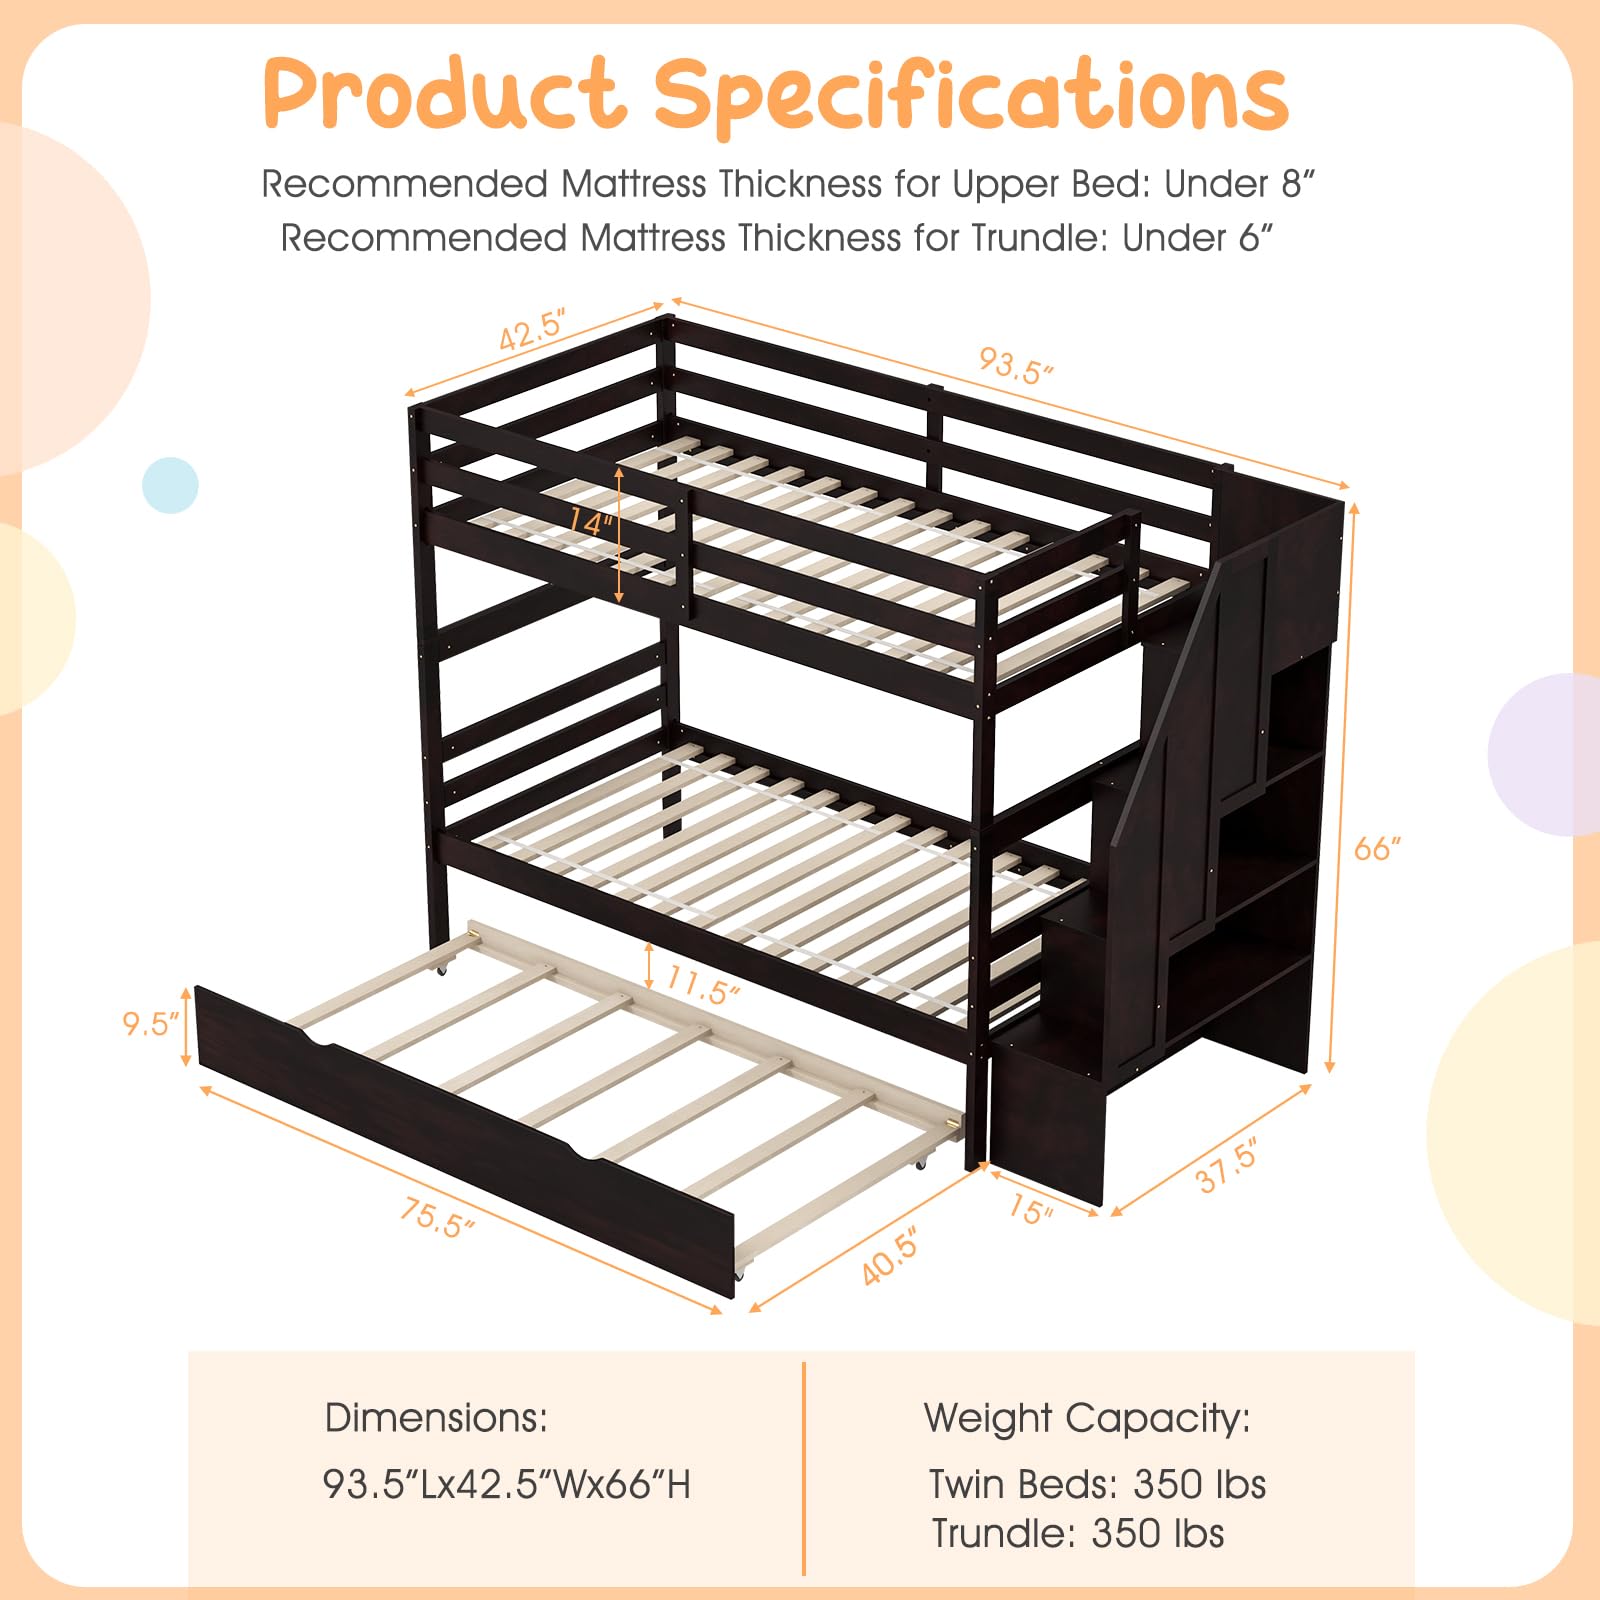 Giantex Twin Over Twin Bunk Bed with Trundle and Storage Stairs, Solid Wood Bunk Bed Convertible 3 Bed Frames for Bedroom